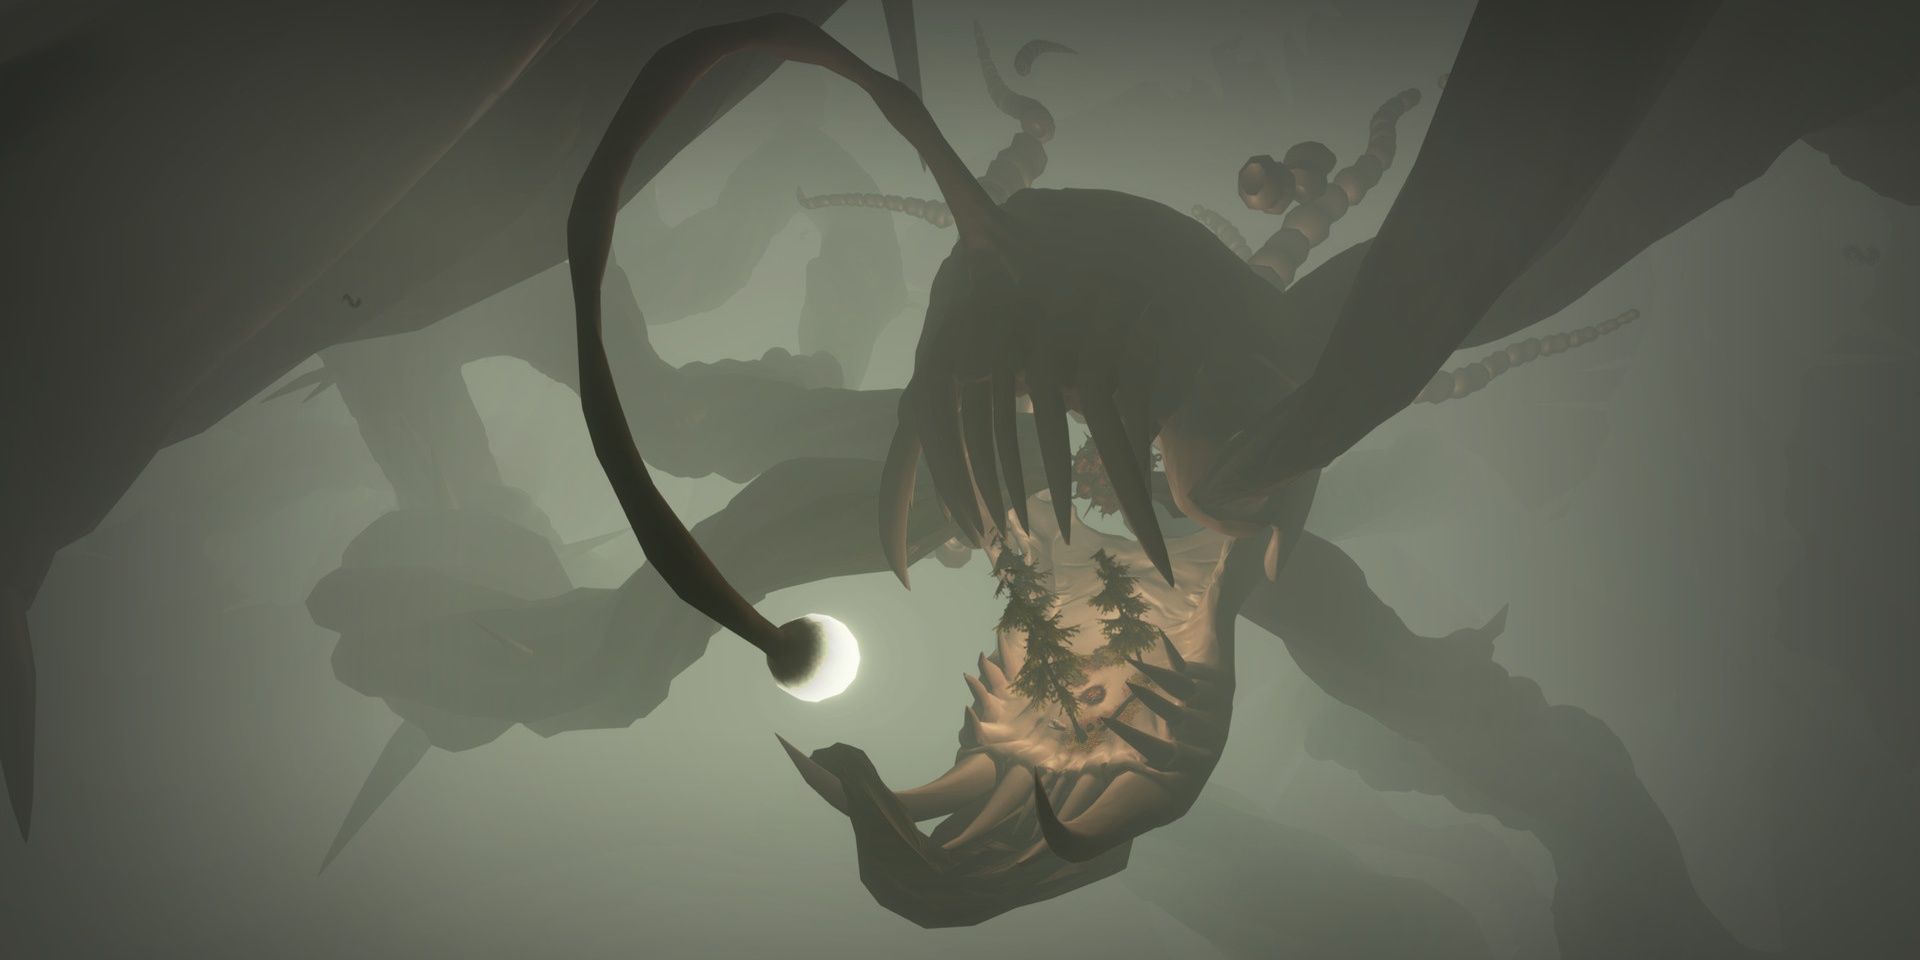 A planet made of angler fish bones in Outer Wilds